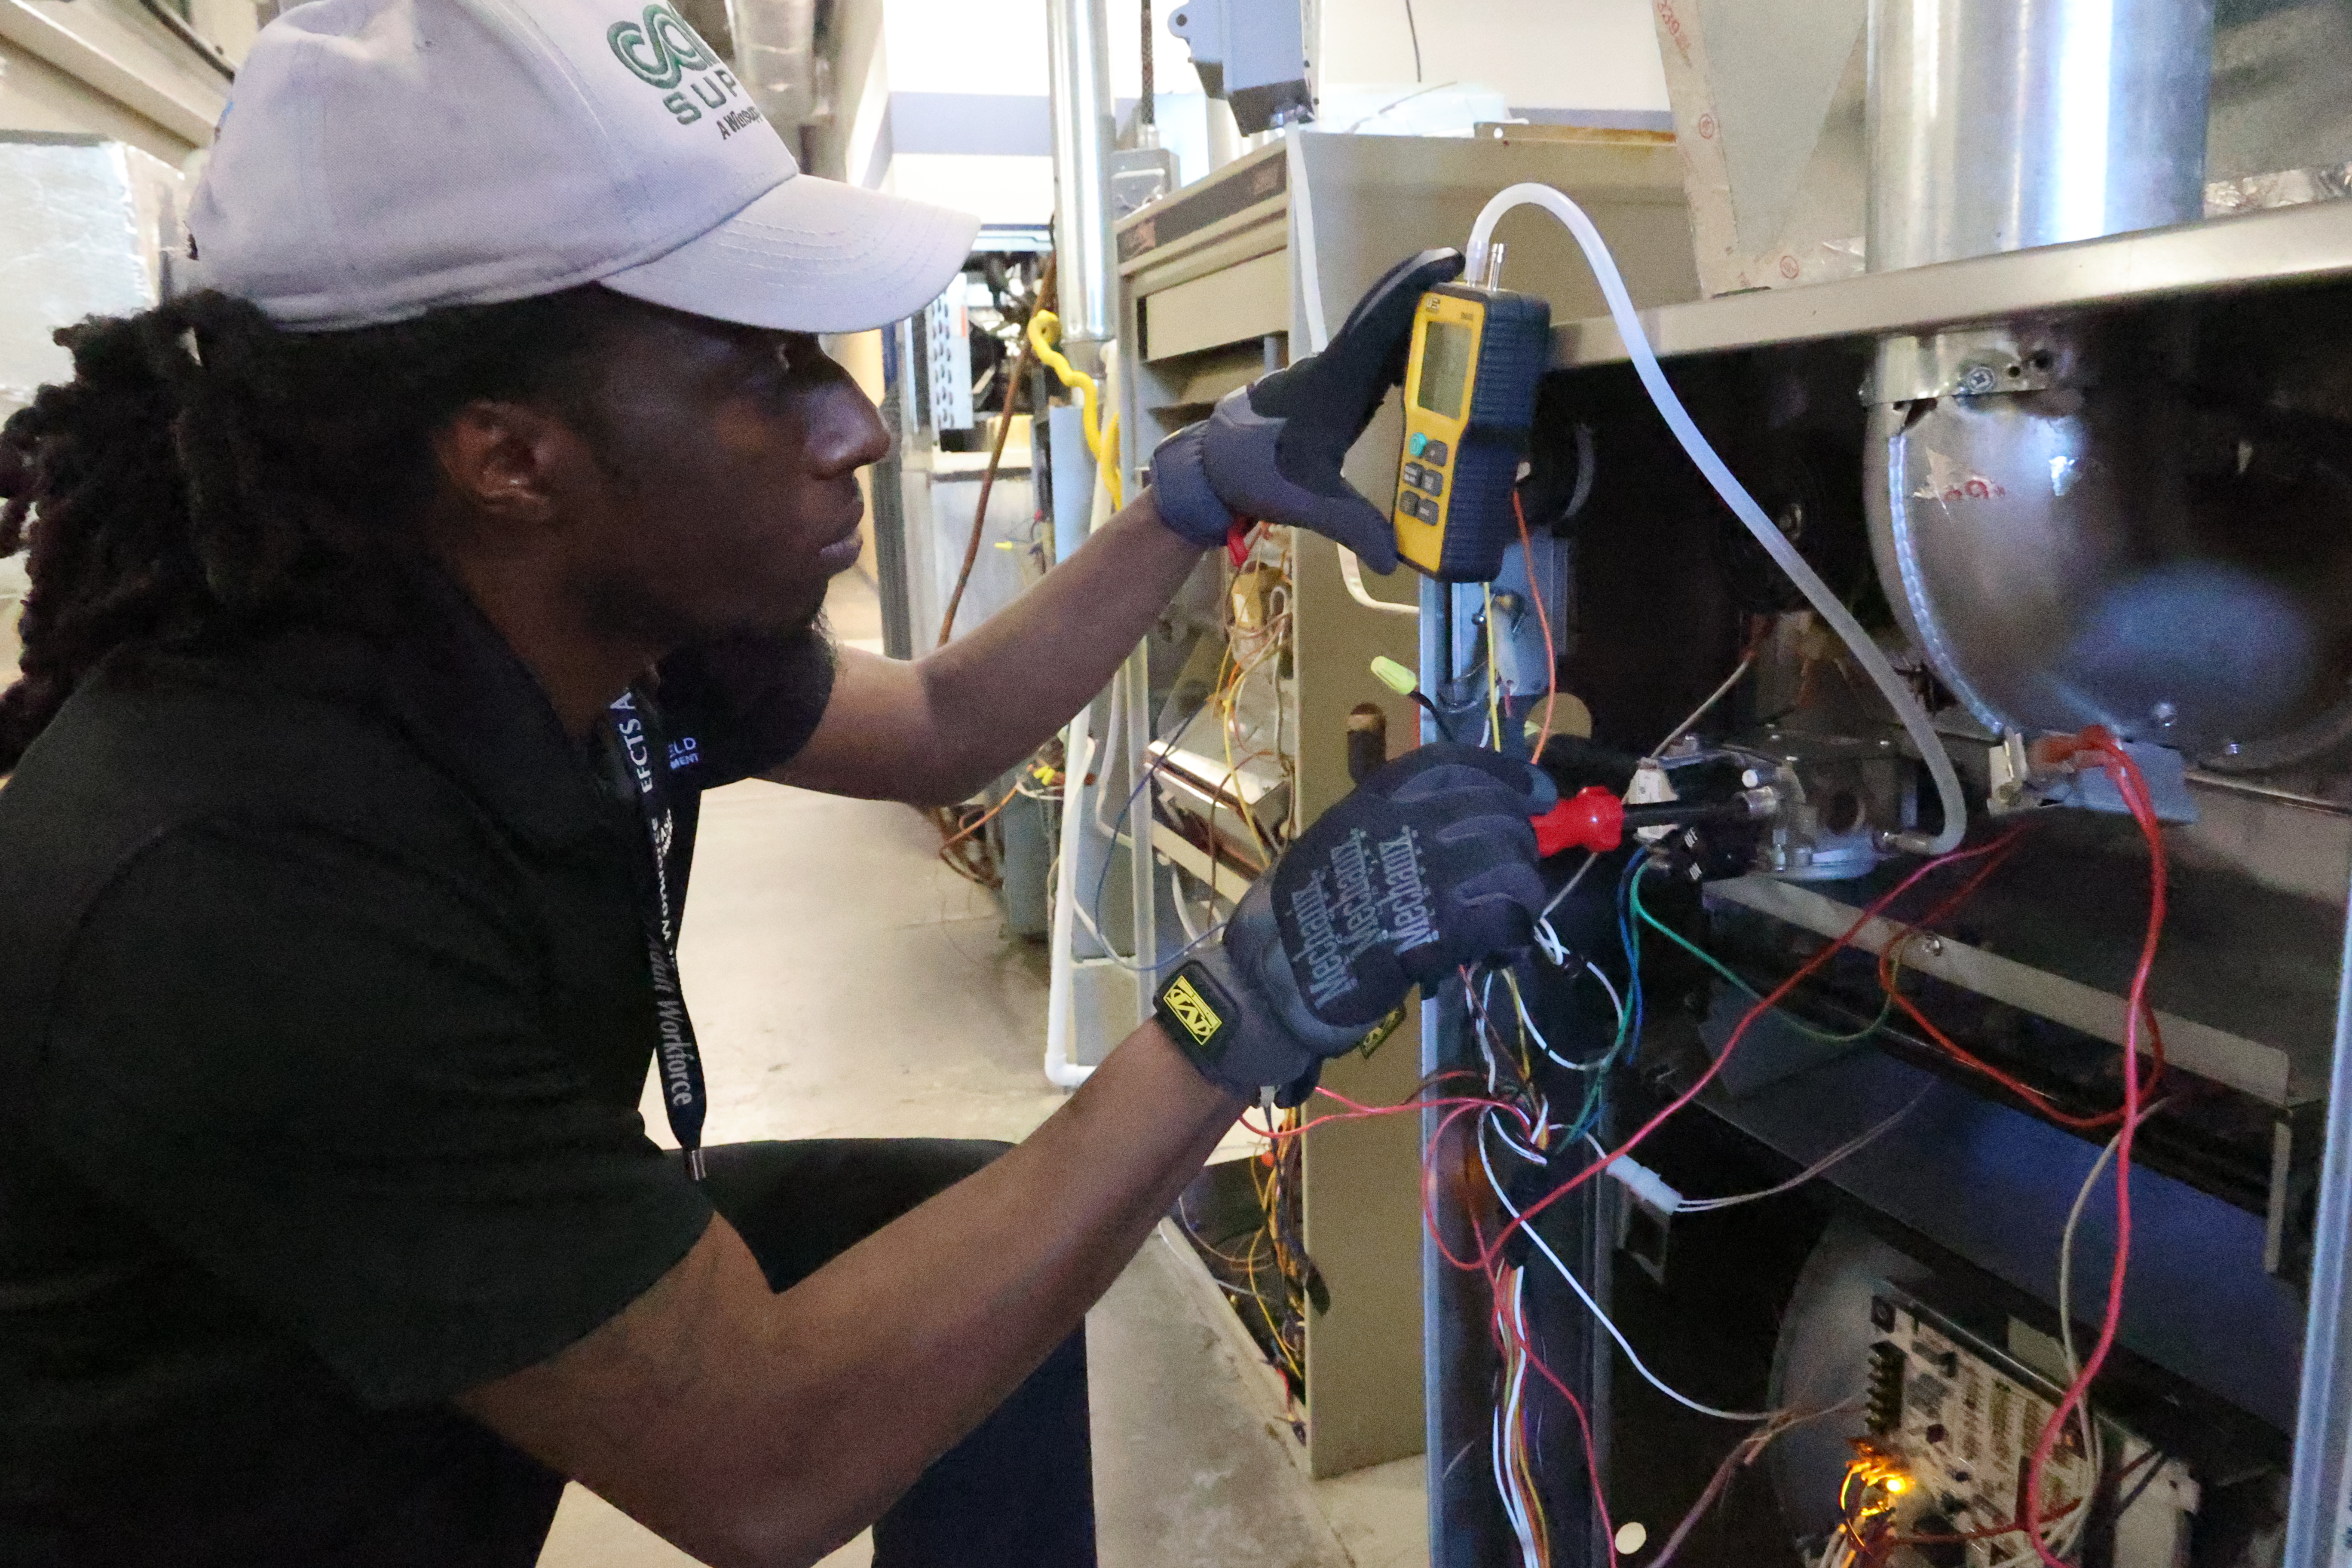 A Black, male student uses a red screwdriver to make adjustments to an AC unit.